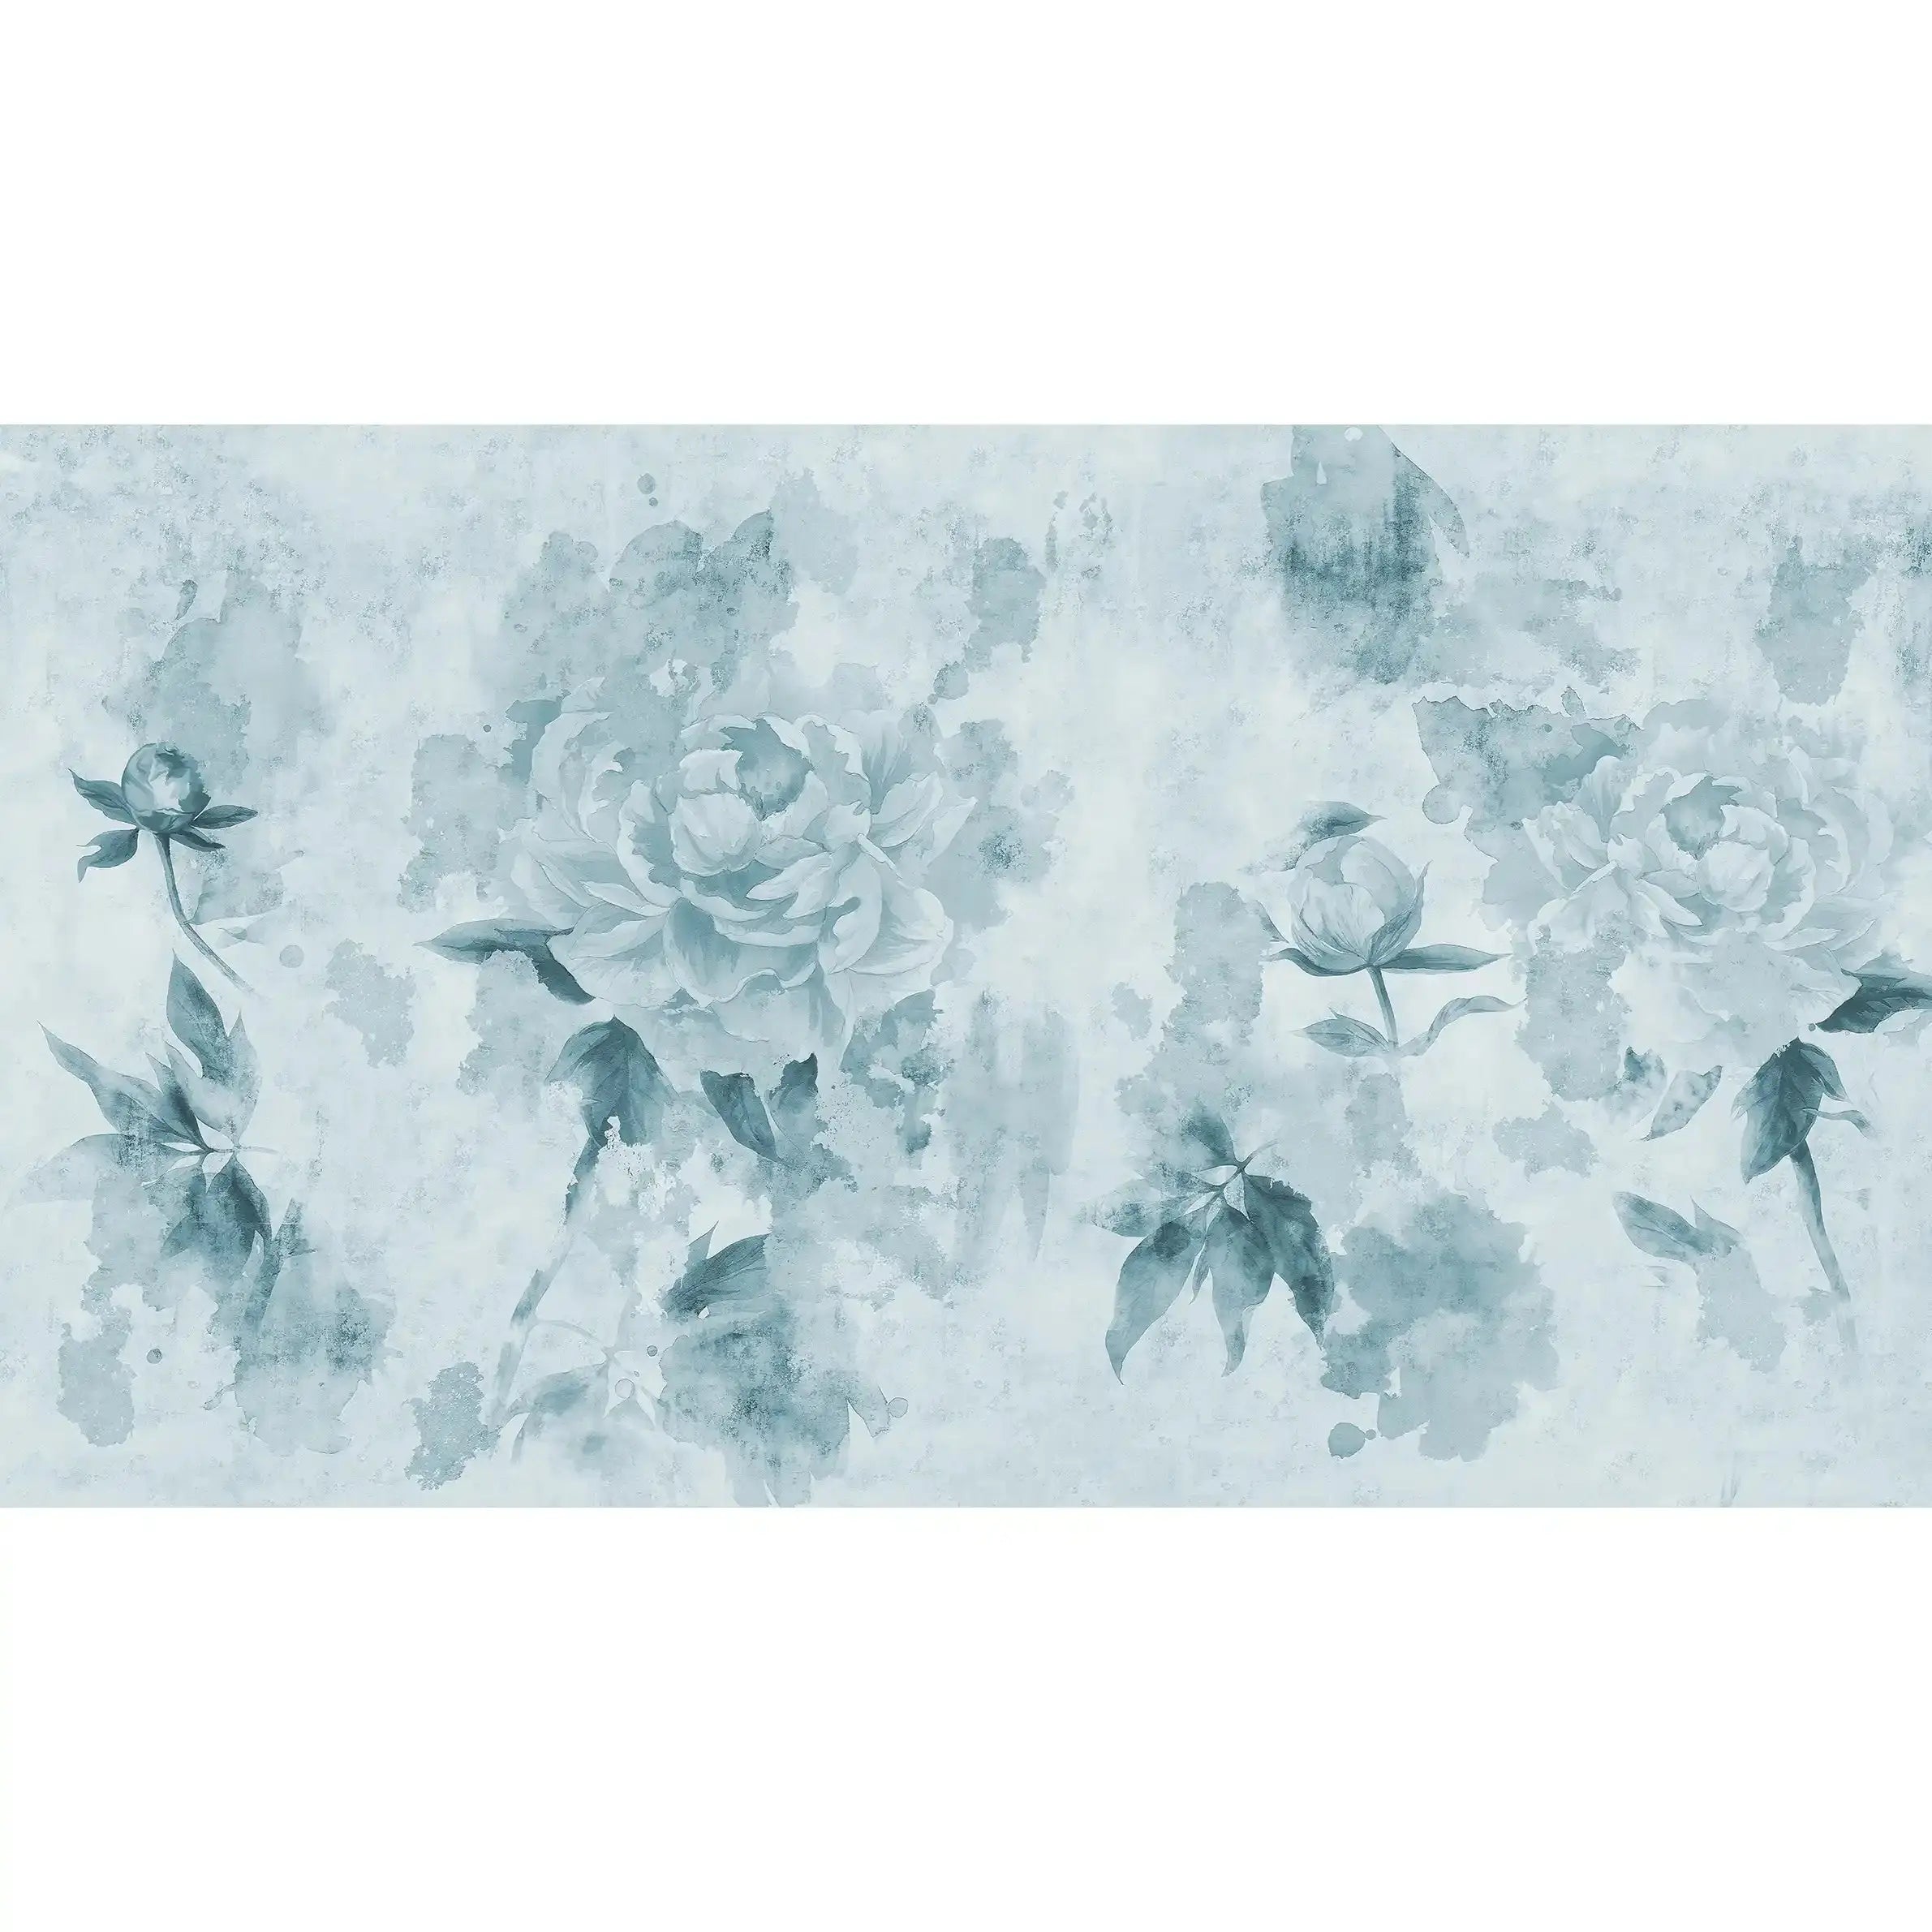 3004-C / Watercolor Floral Peel and Stick Wallpaper - Peony Design for Modern Room Decor, Perfect for Bedroom and Bathroom - Artevella